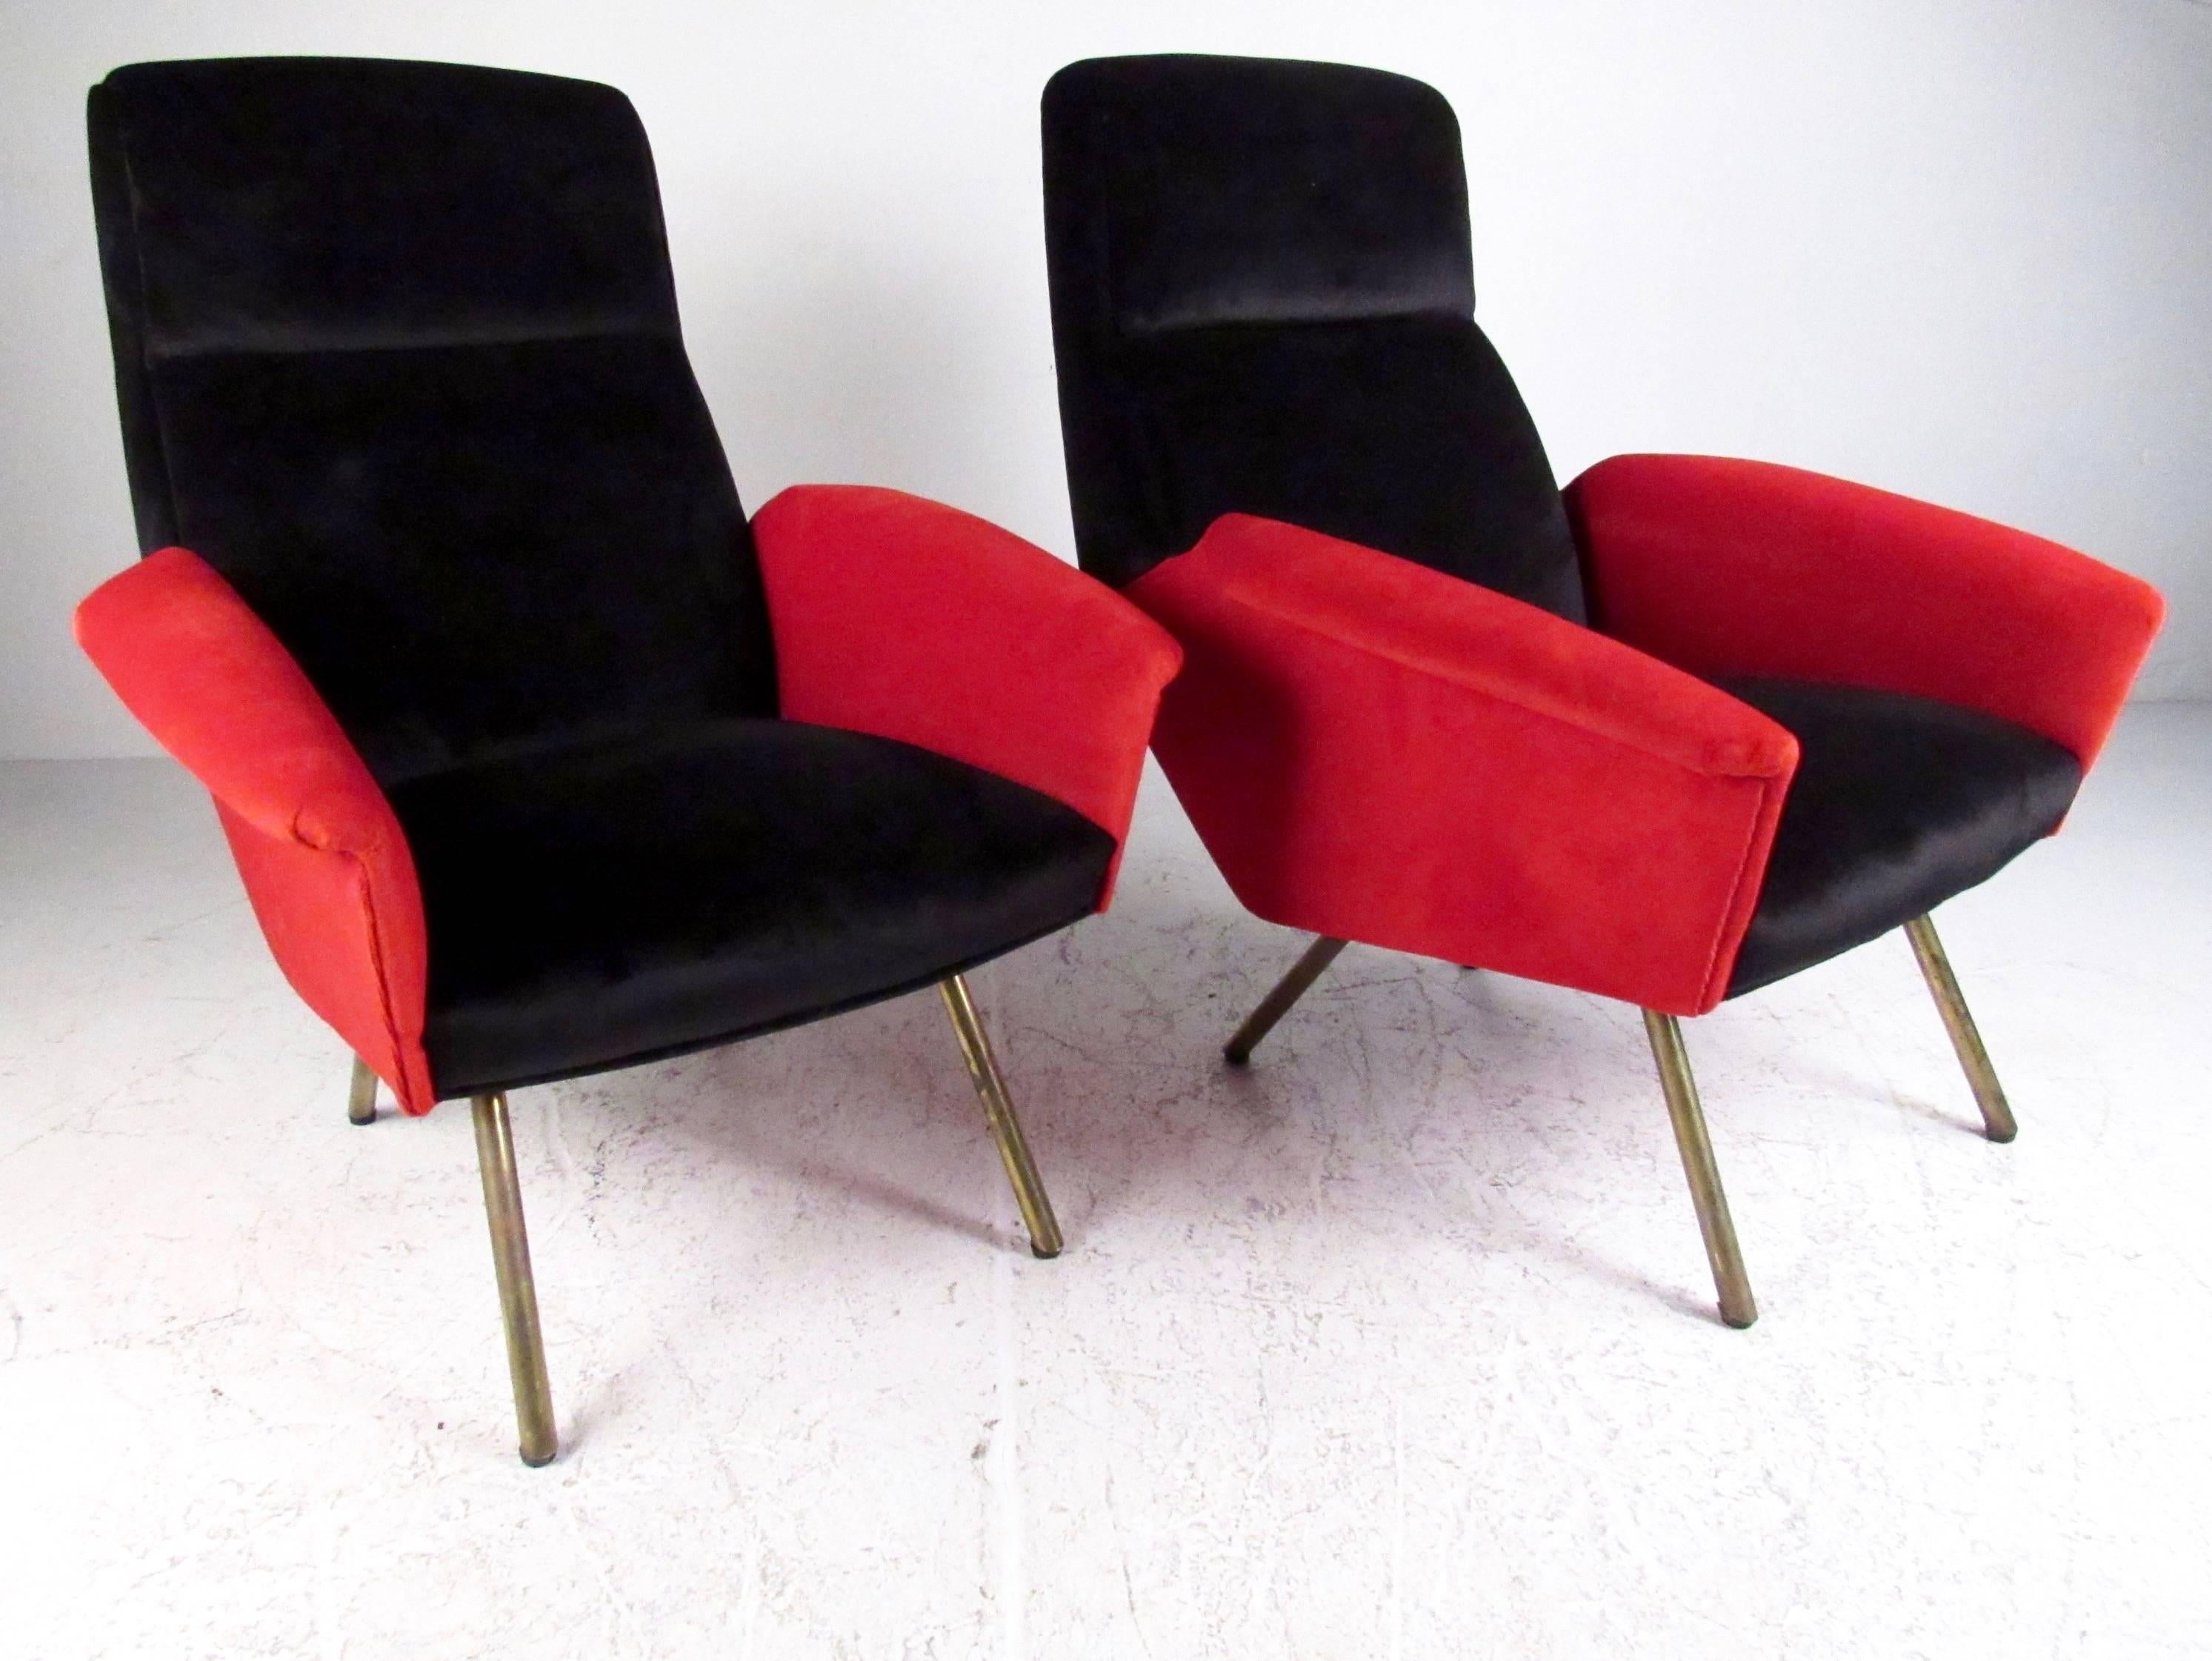 This uniquely sculpted pair of contemporary modern lounge chairs feature stylish Italian design, comfortable upholstered seats, and brass finish legs. Unique red and black fabric adds to the impressive visual statement of the pair, making them a